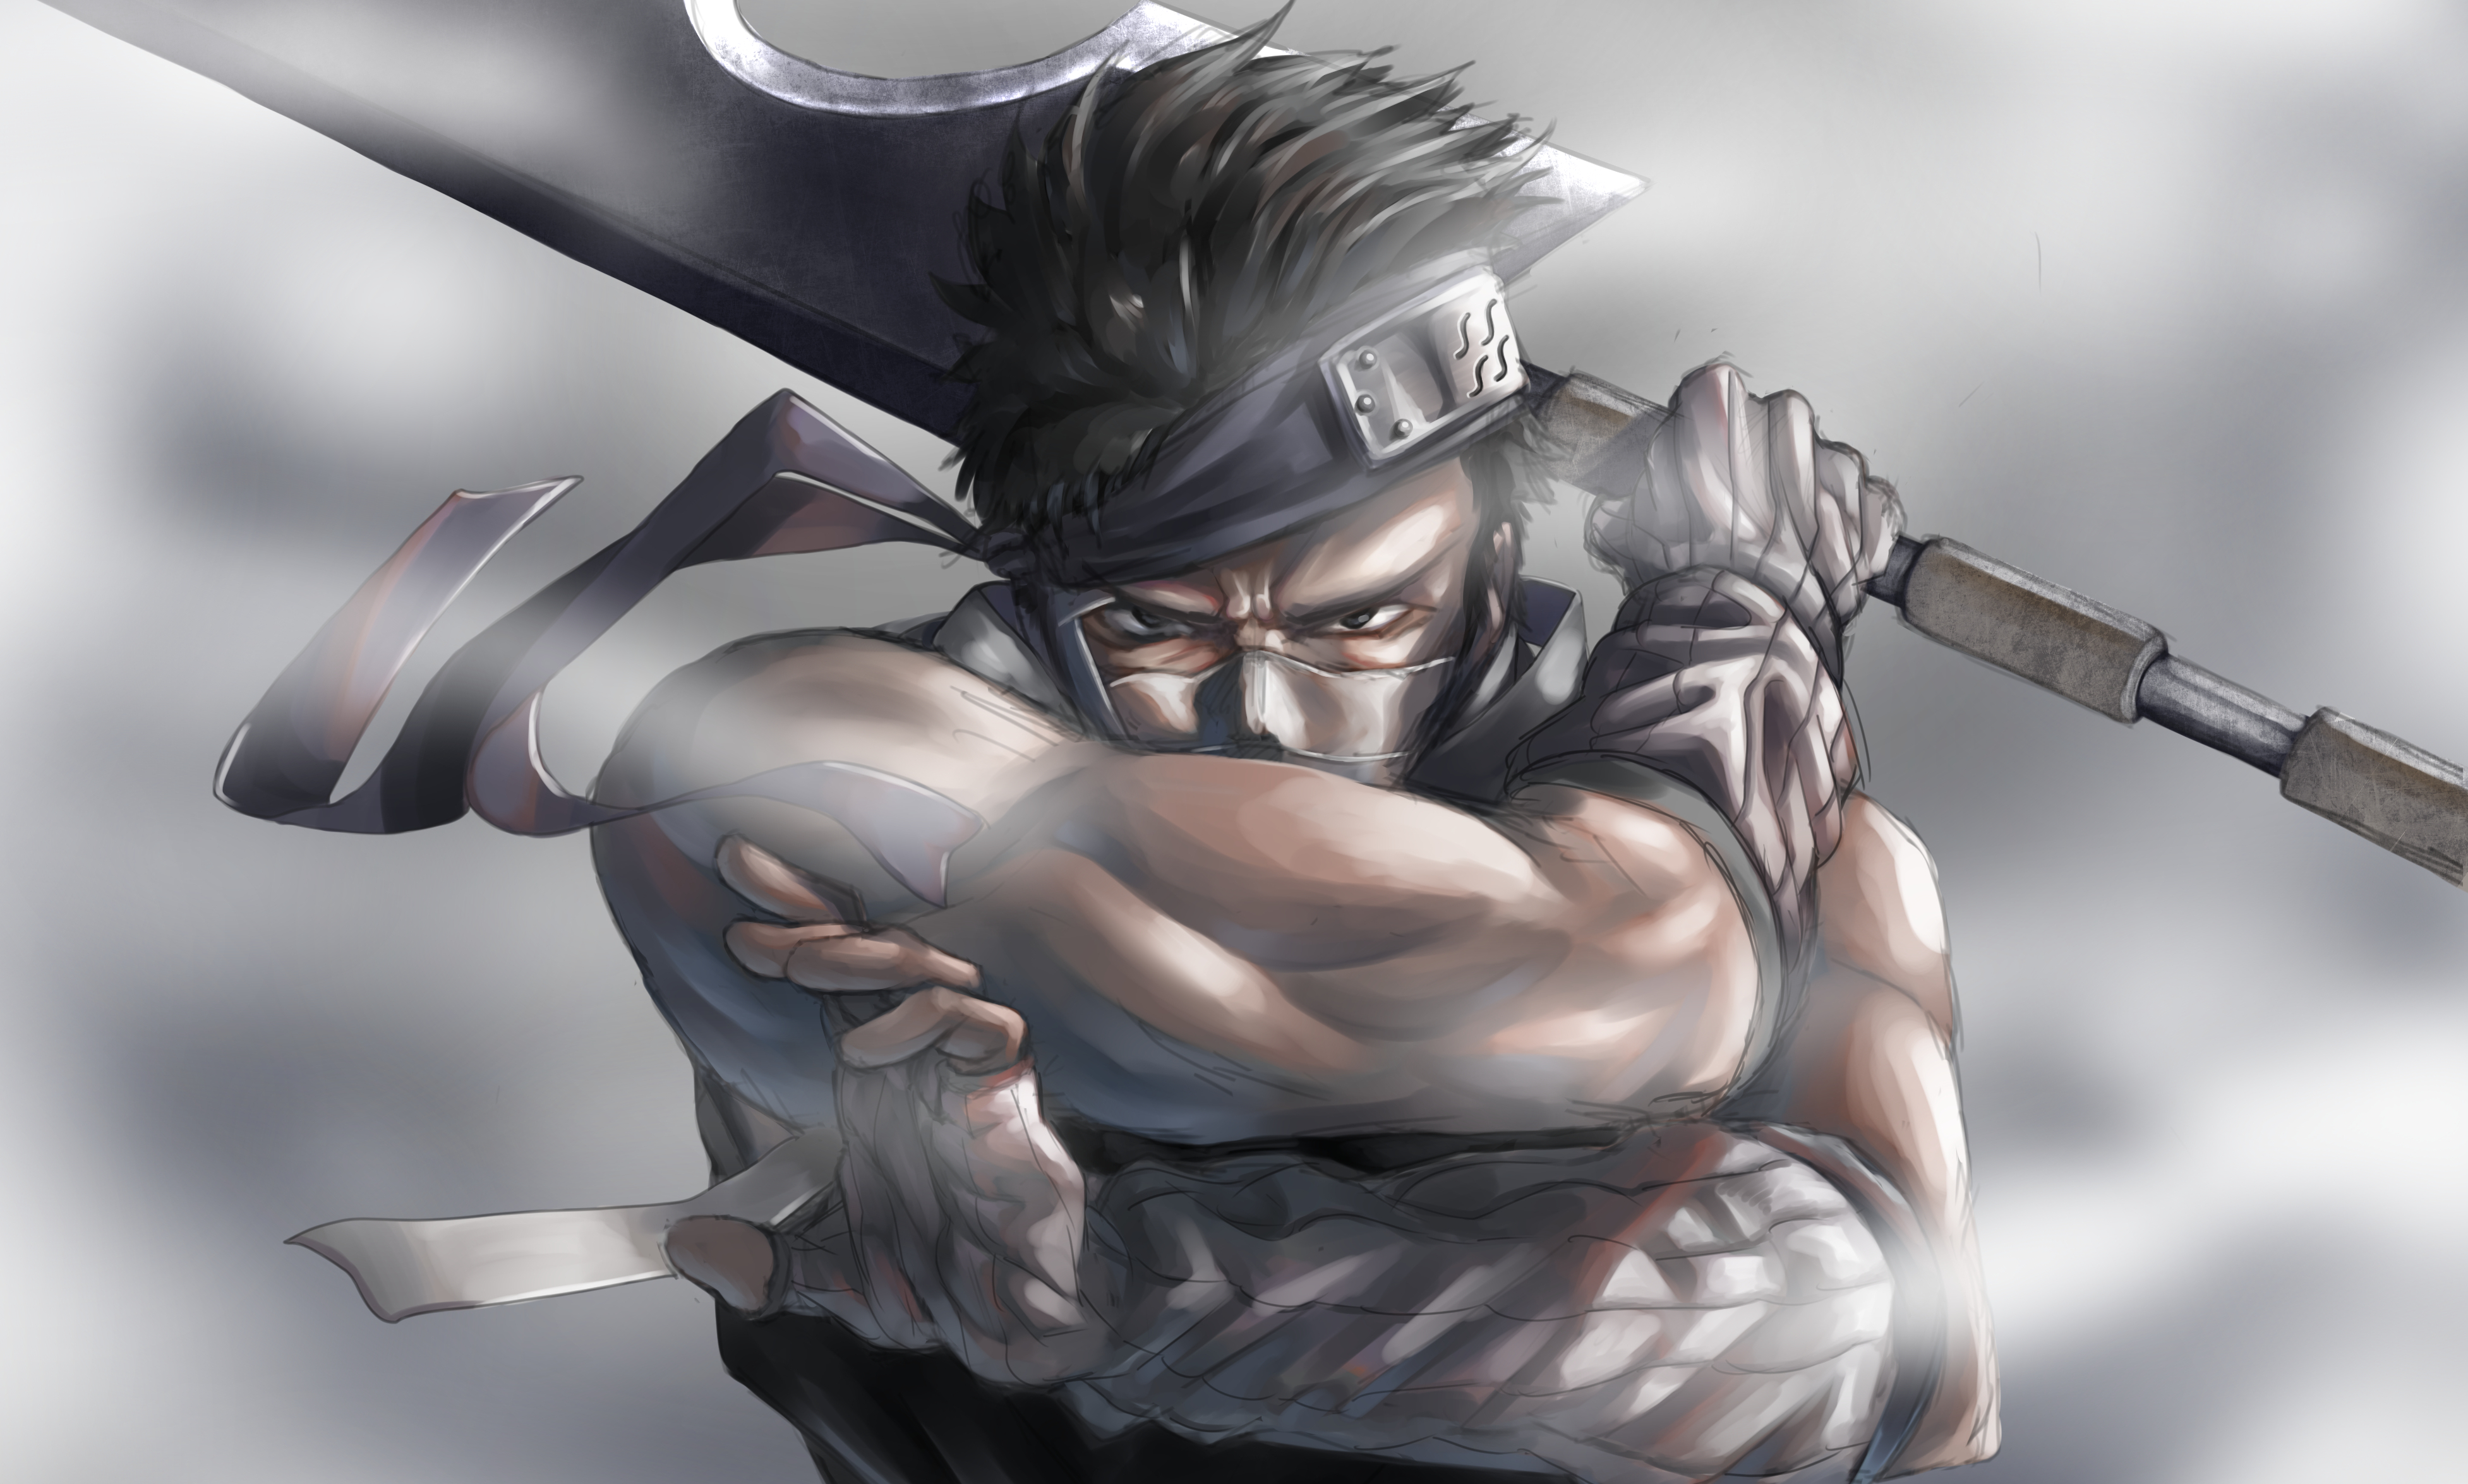 2560x1700 Zabuza Momochi Art Chromebook Pixel Wallpaper Hd Anime 4k Wallpapers Images Photos And Background Find and download zabuza wallpaper on hipwallpaper. 2560x1700 zabuza momochi art chromebook